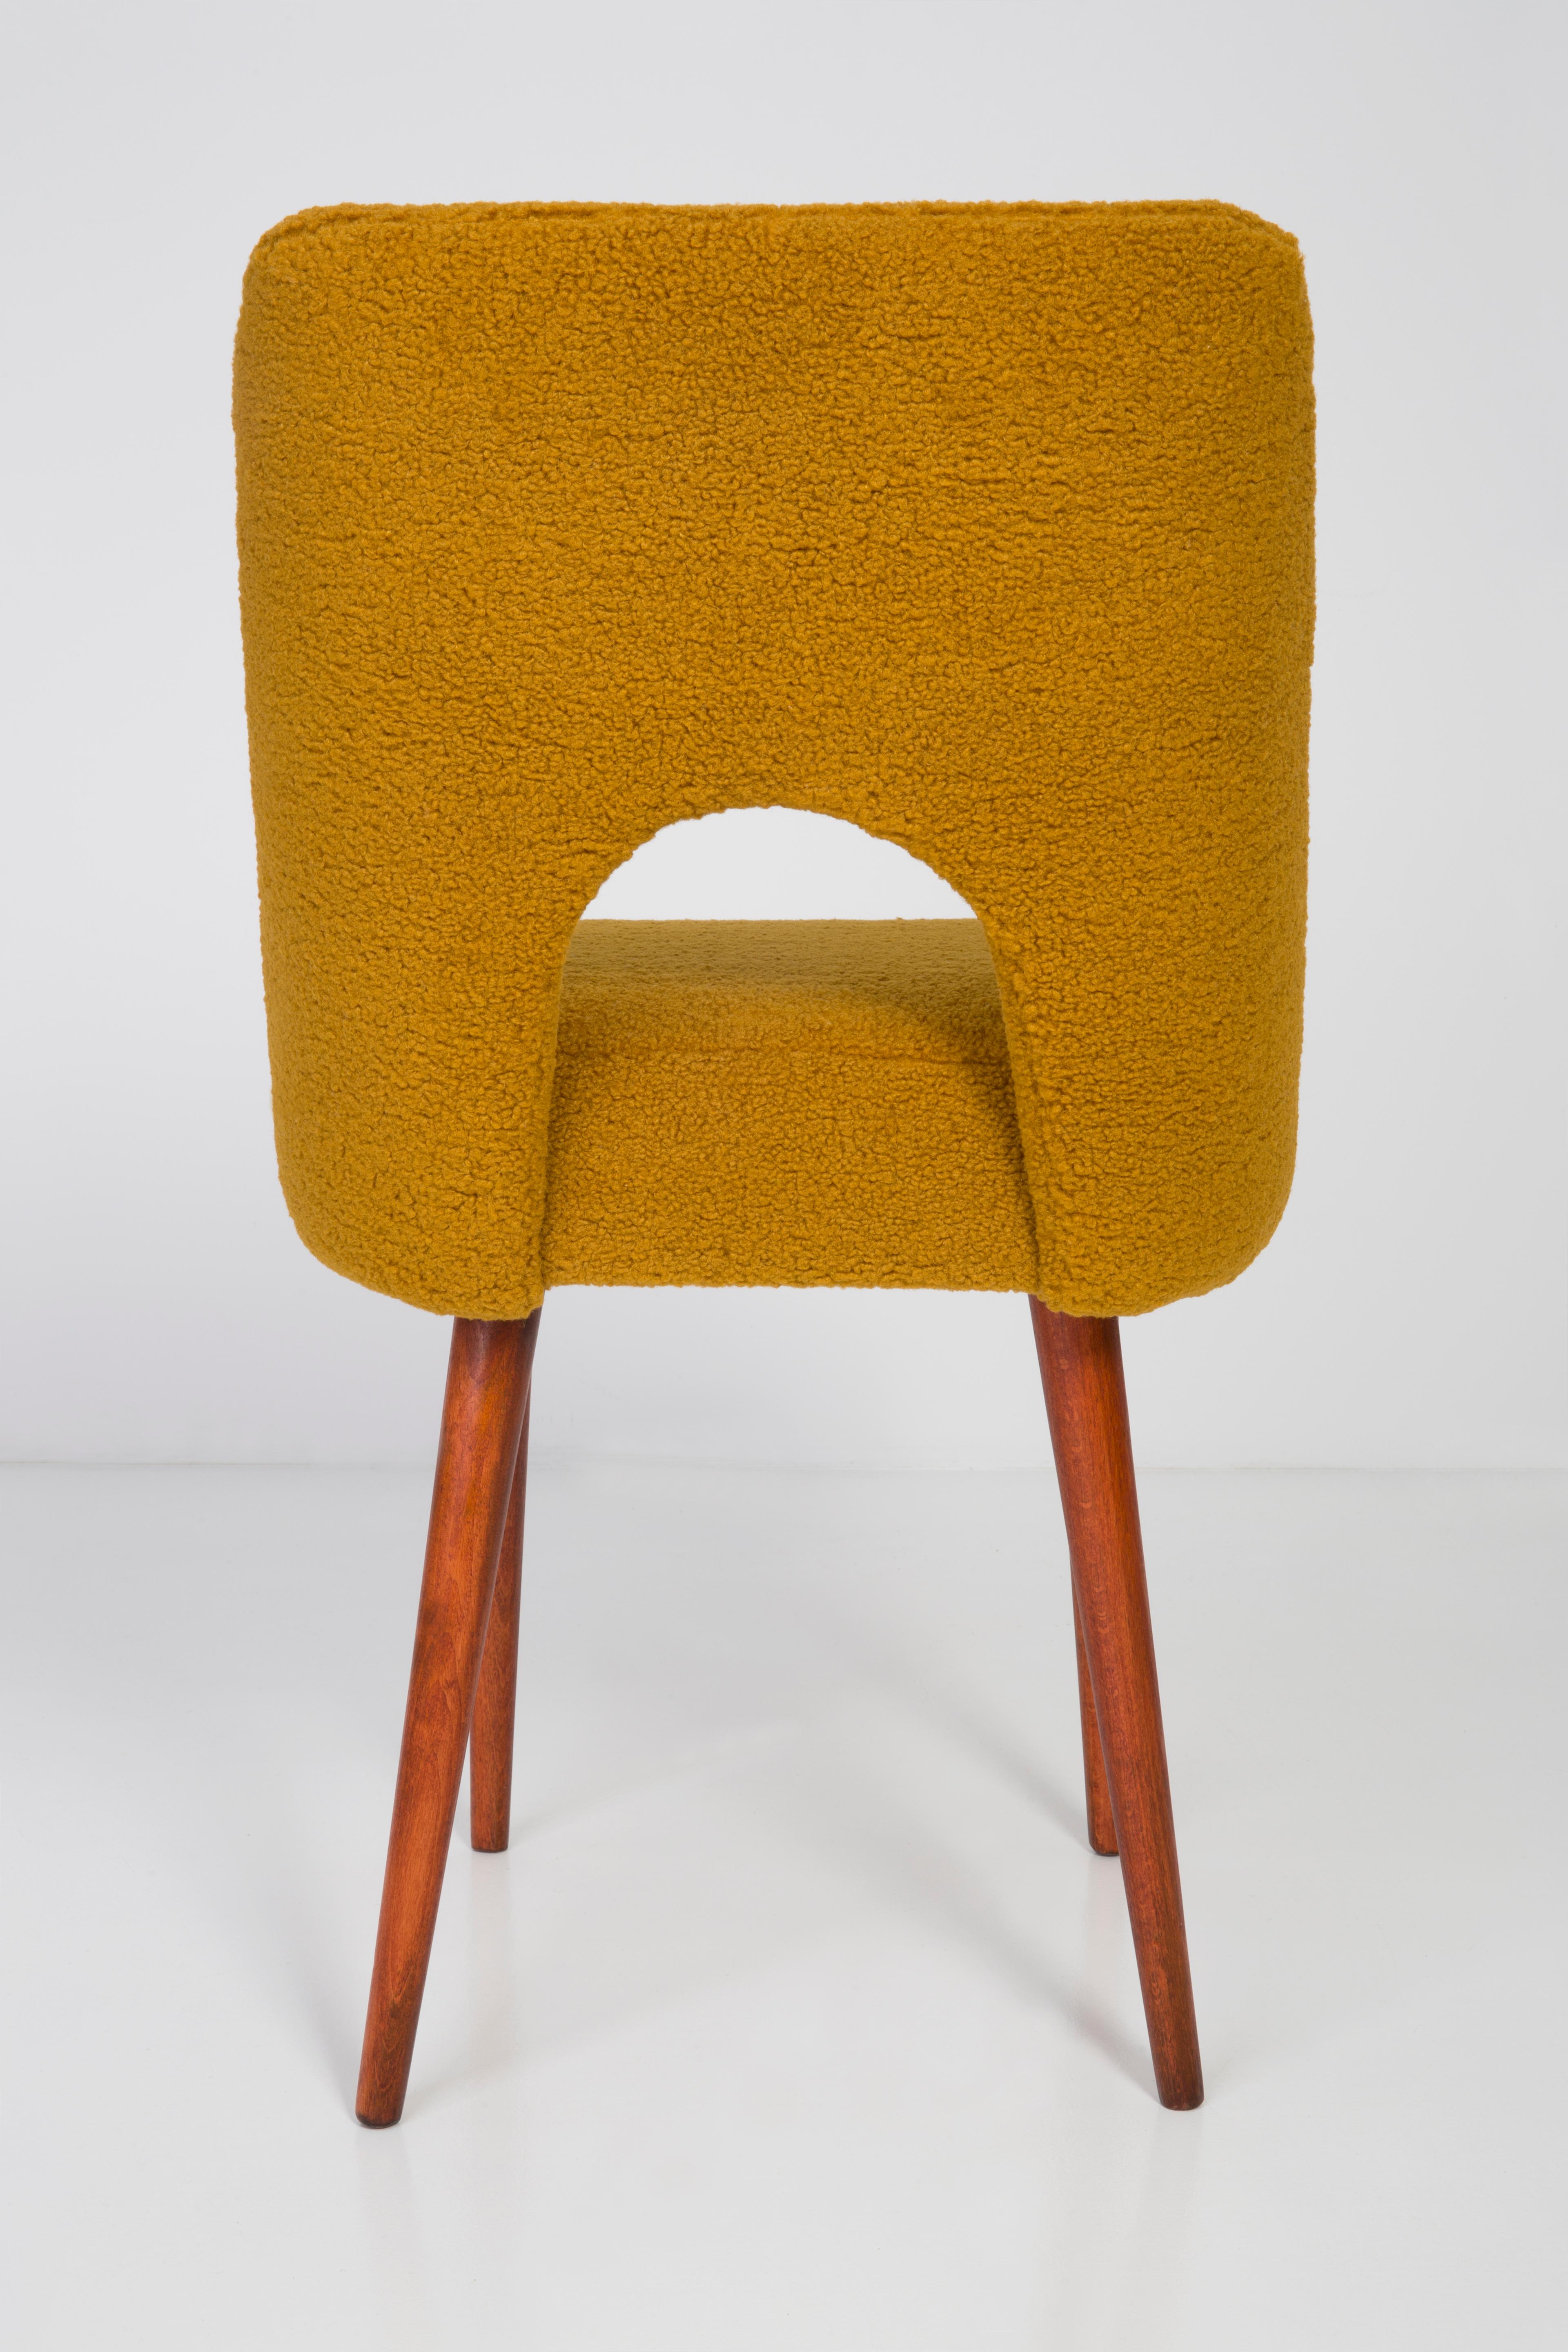 Yellow Ochre Boucle 'Shell' Chair, 1960s For Sale 2